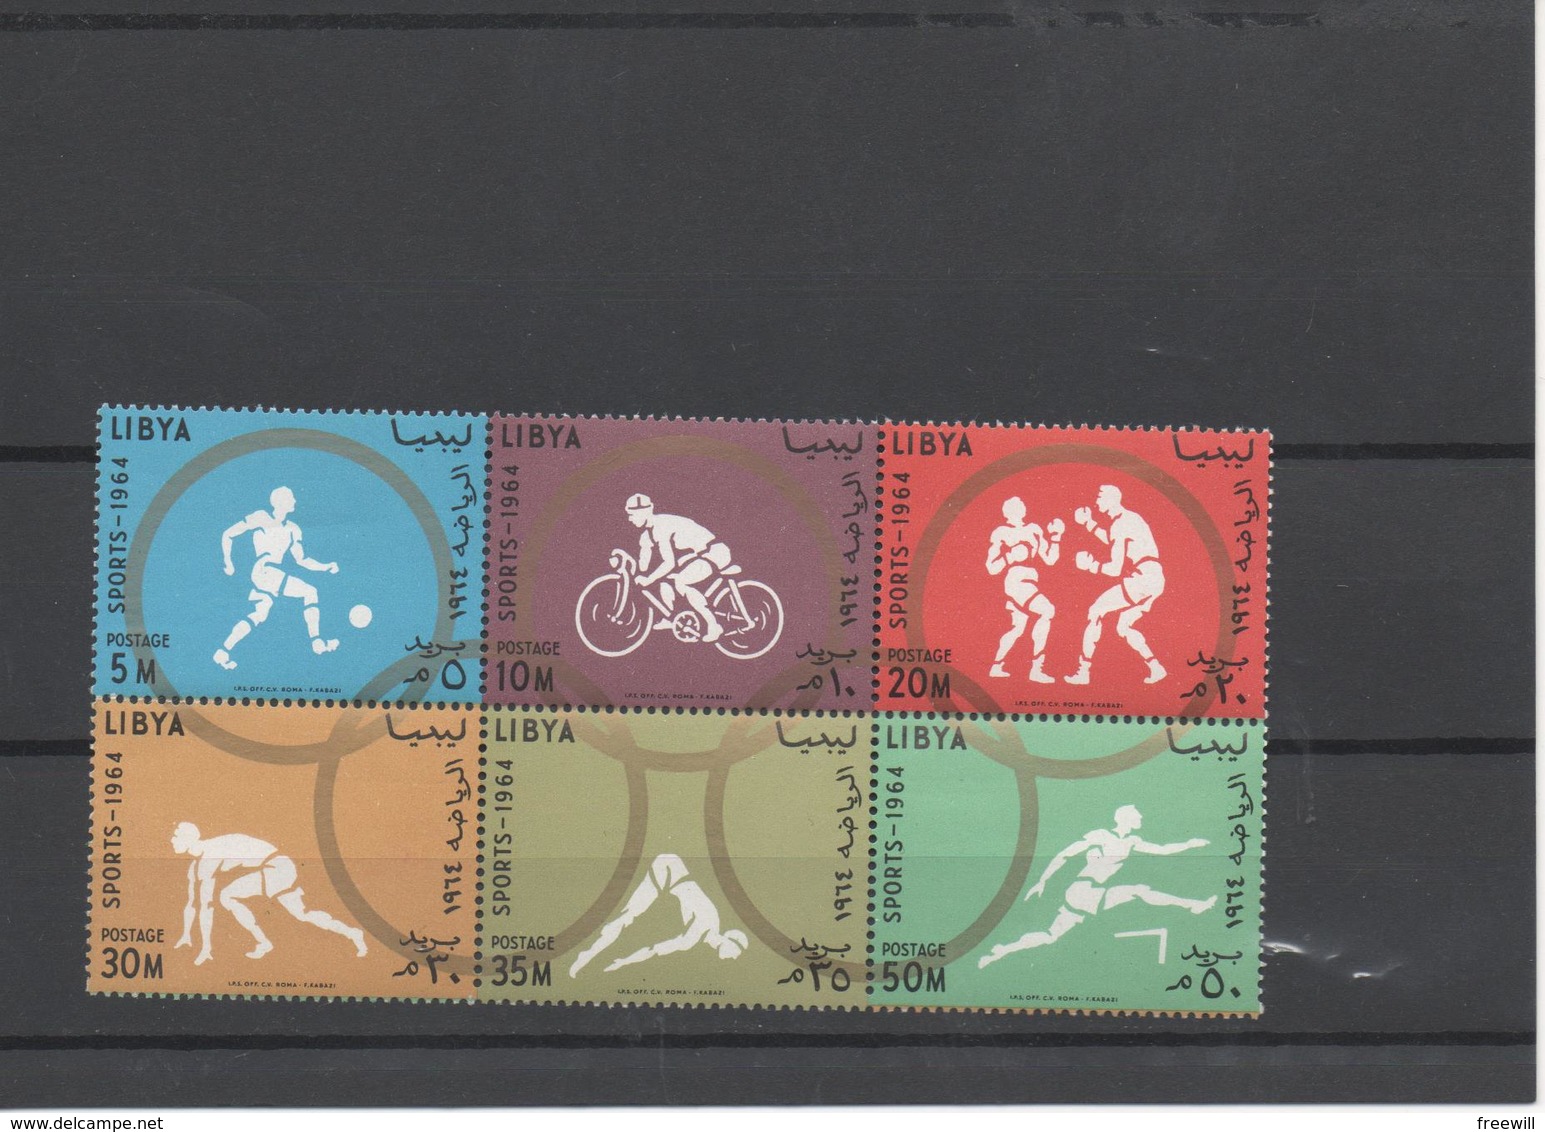 Jeux Olympiques De Tokyo1964 - Olympicgames 1964- MnNH - Libye